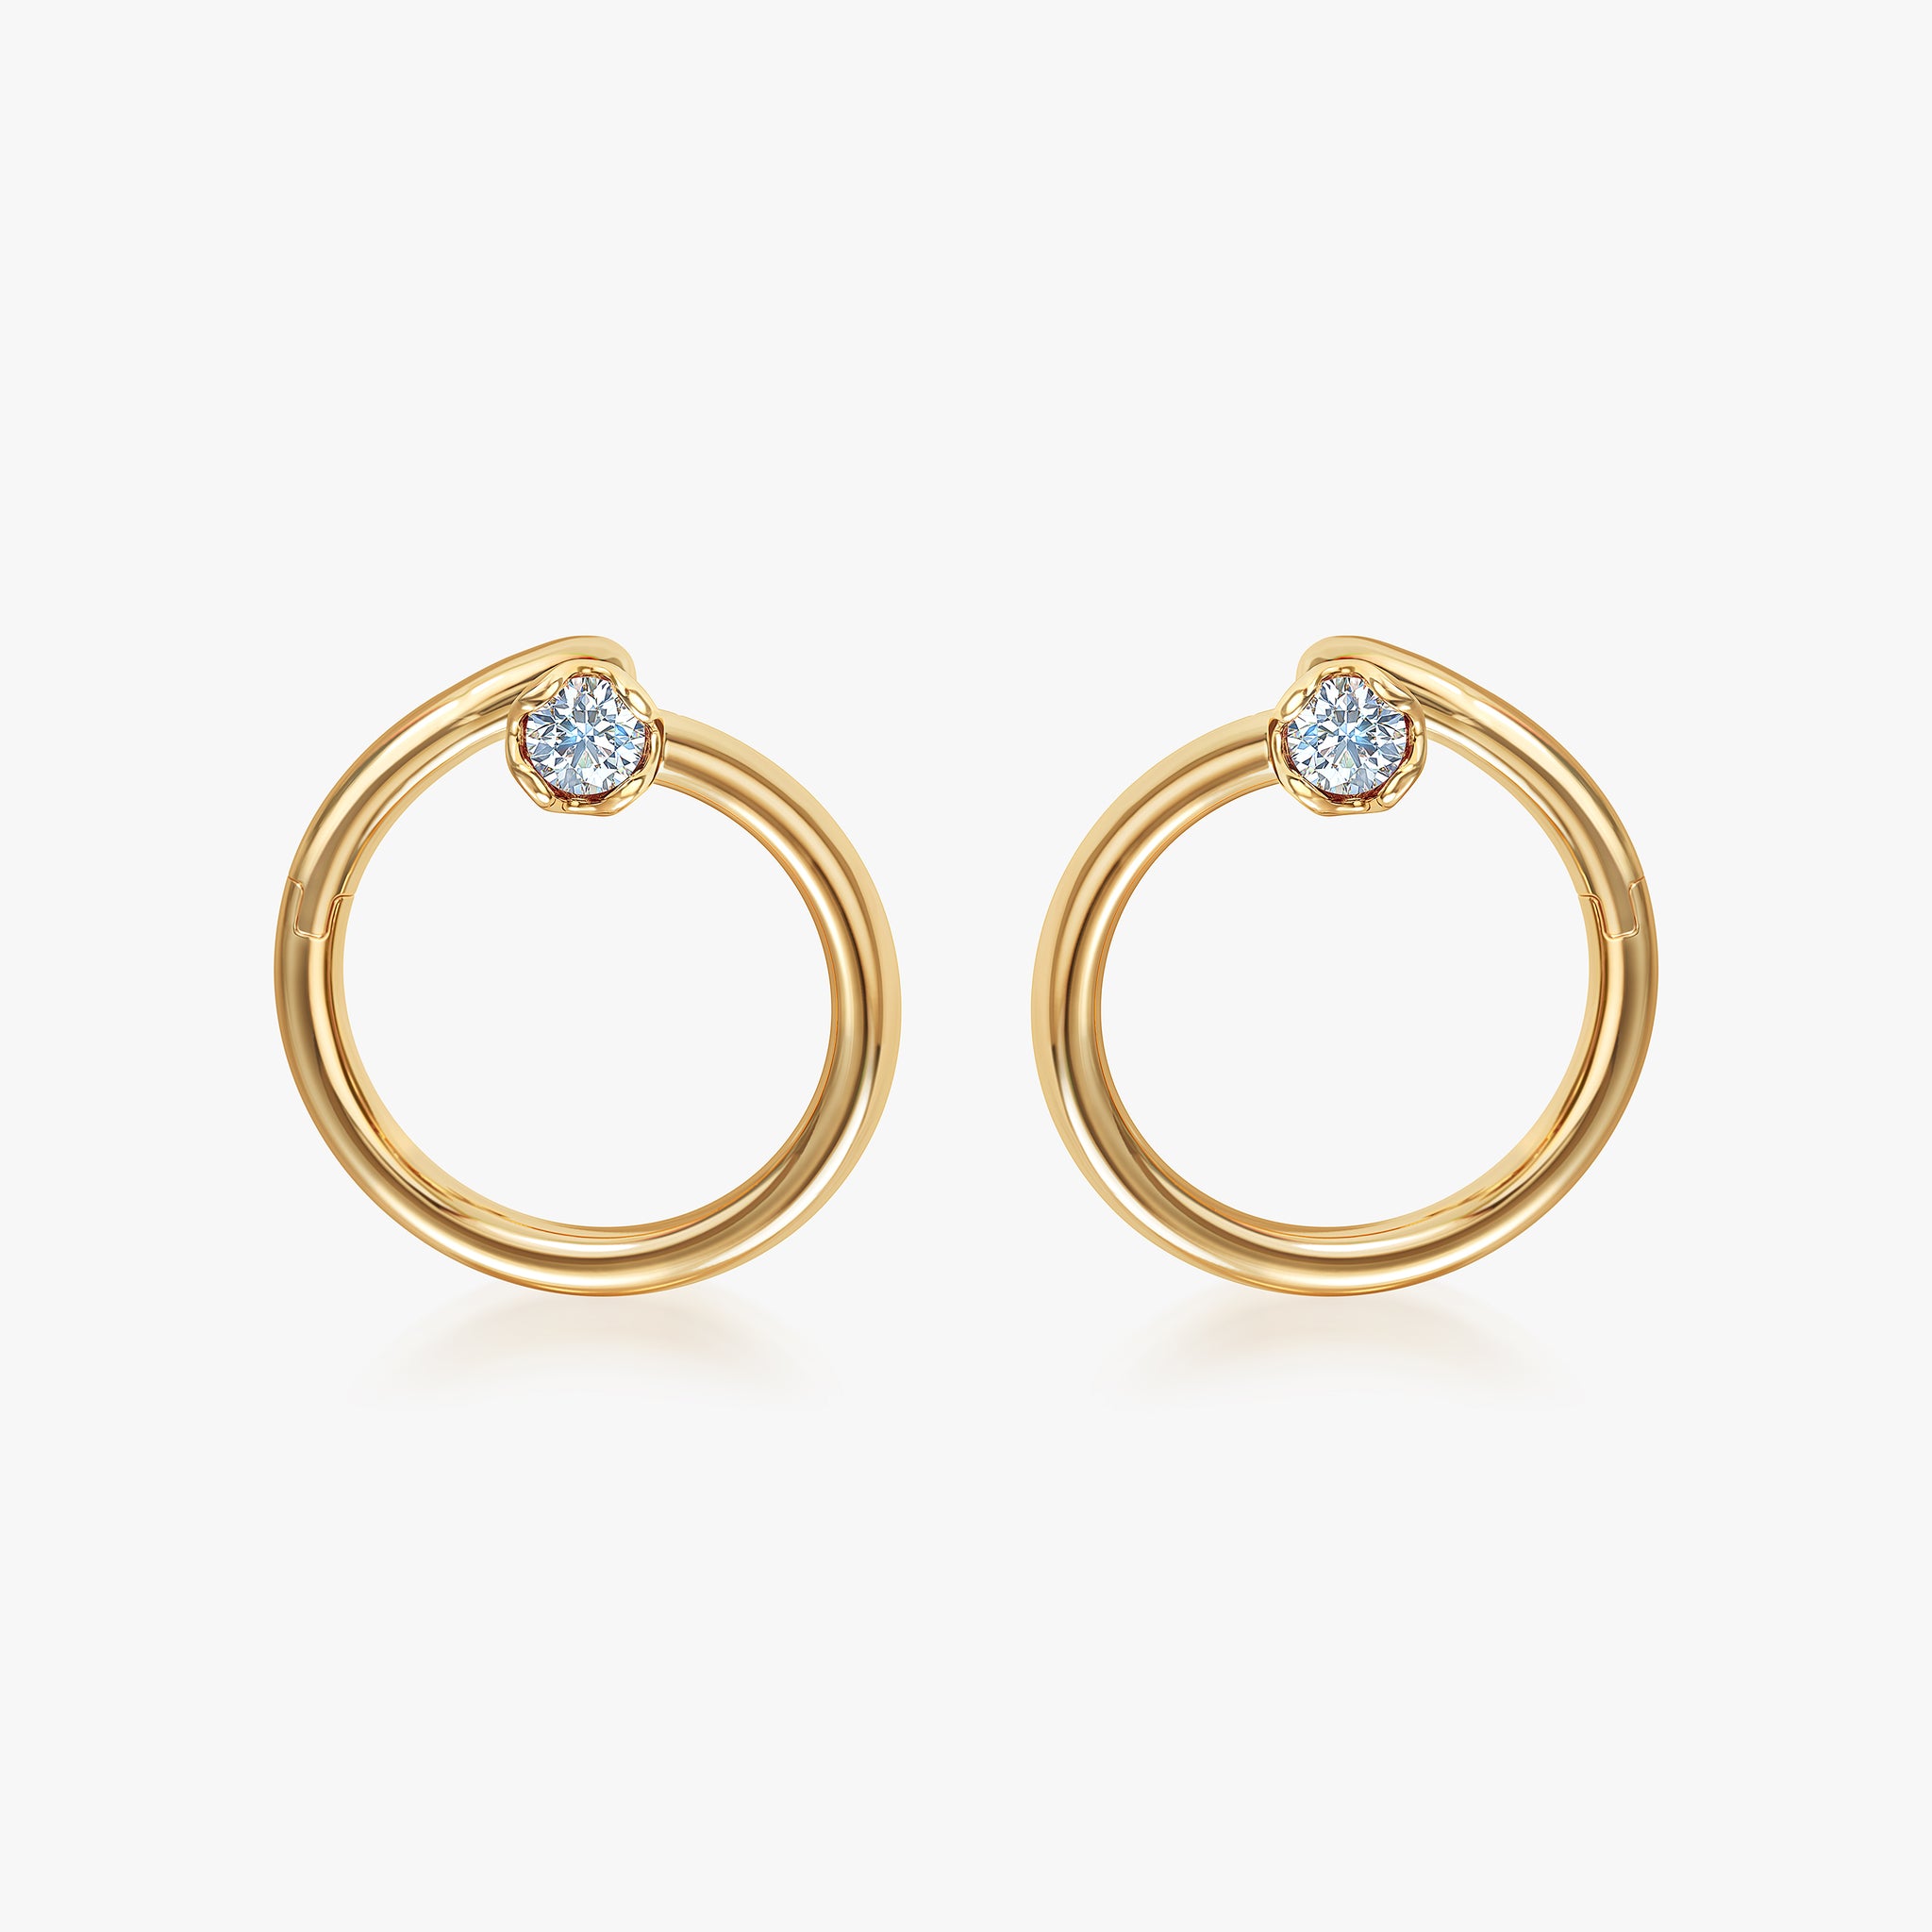 J'EVAR 14KT Yellow Gold Enso ALTR Lab Grown Diamond Earrings Front View | 0.30 CT